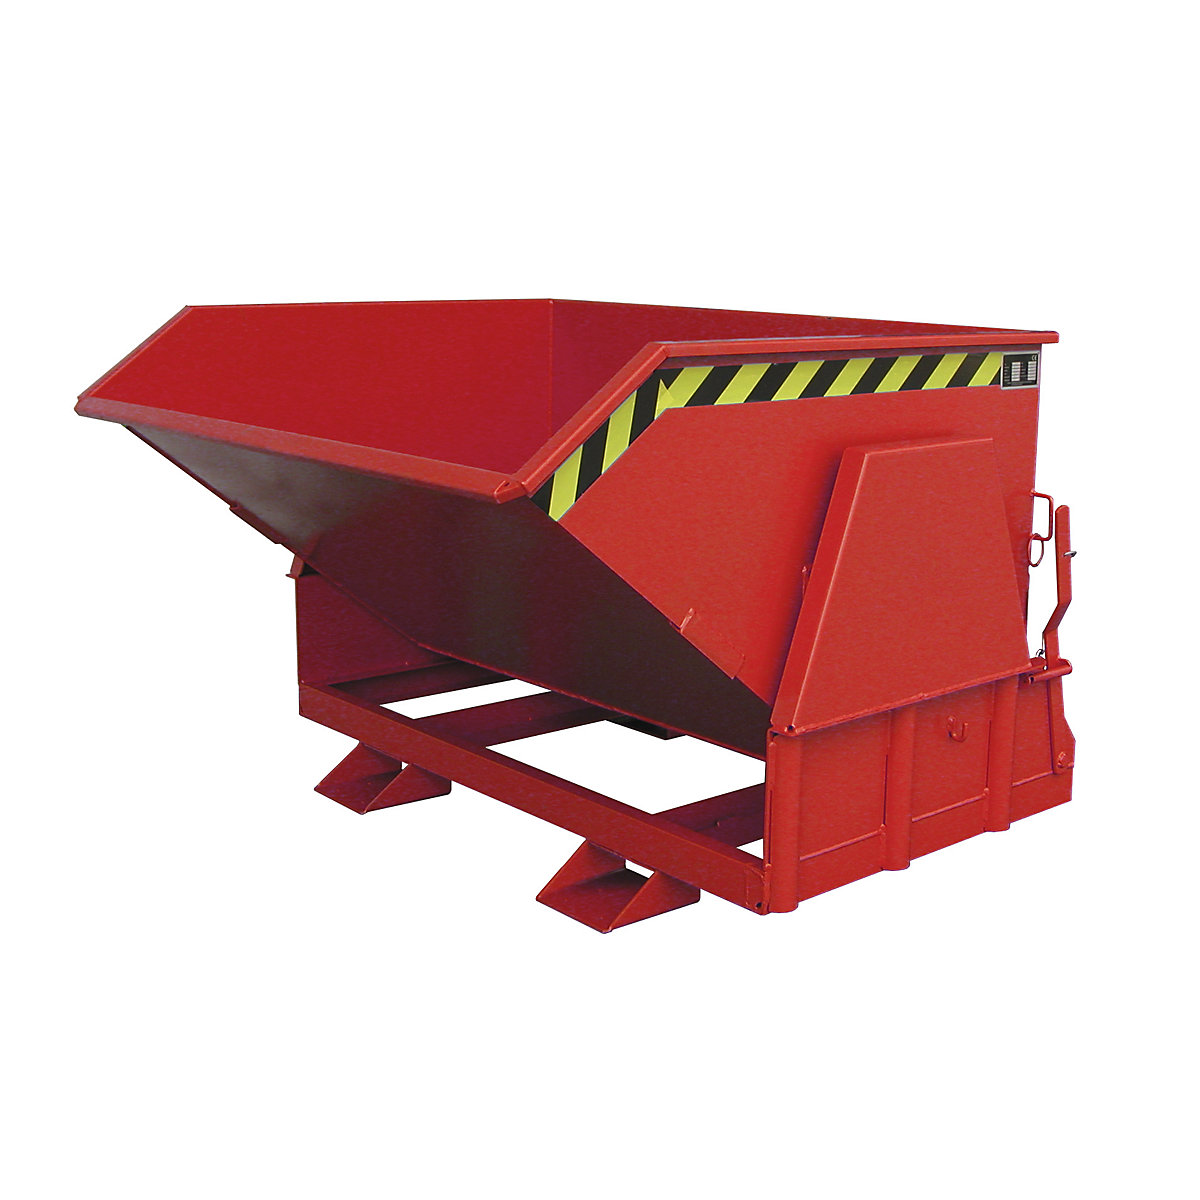 Tilting skip, standard overall height, without wheels – eurokraft pro, capacity 1.0 m³, painted red RAL 3000-9